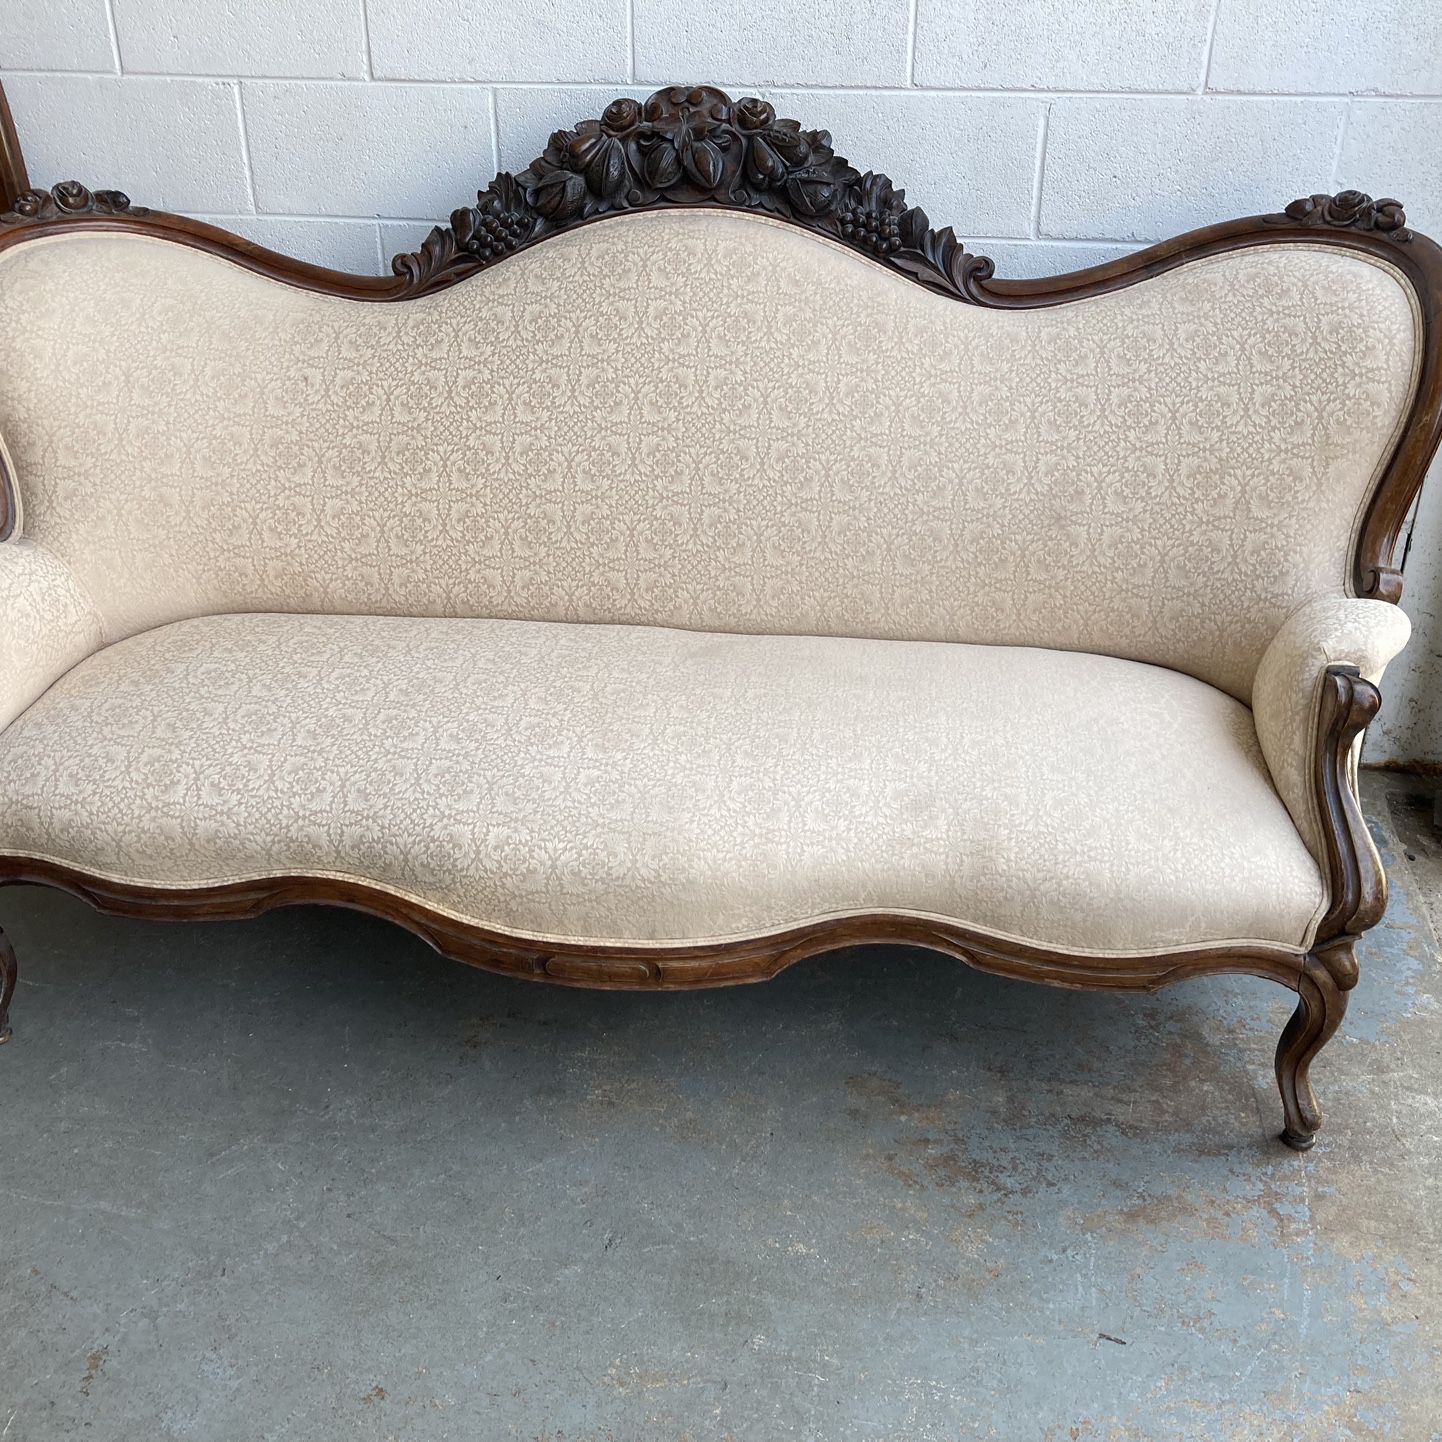 19th C French Walnut Intricately Carved Victorian Couch With High Back Nice Beige Silk Upholstery For In Glenview Il Offerup